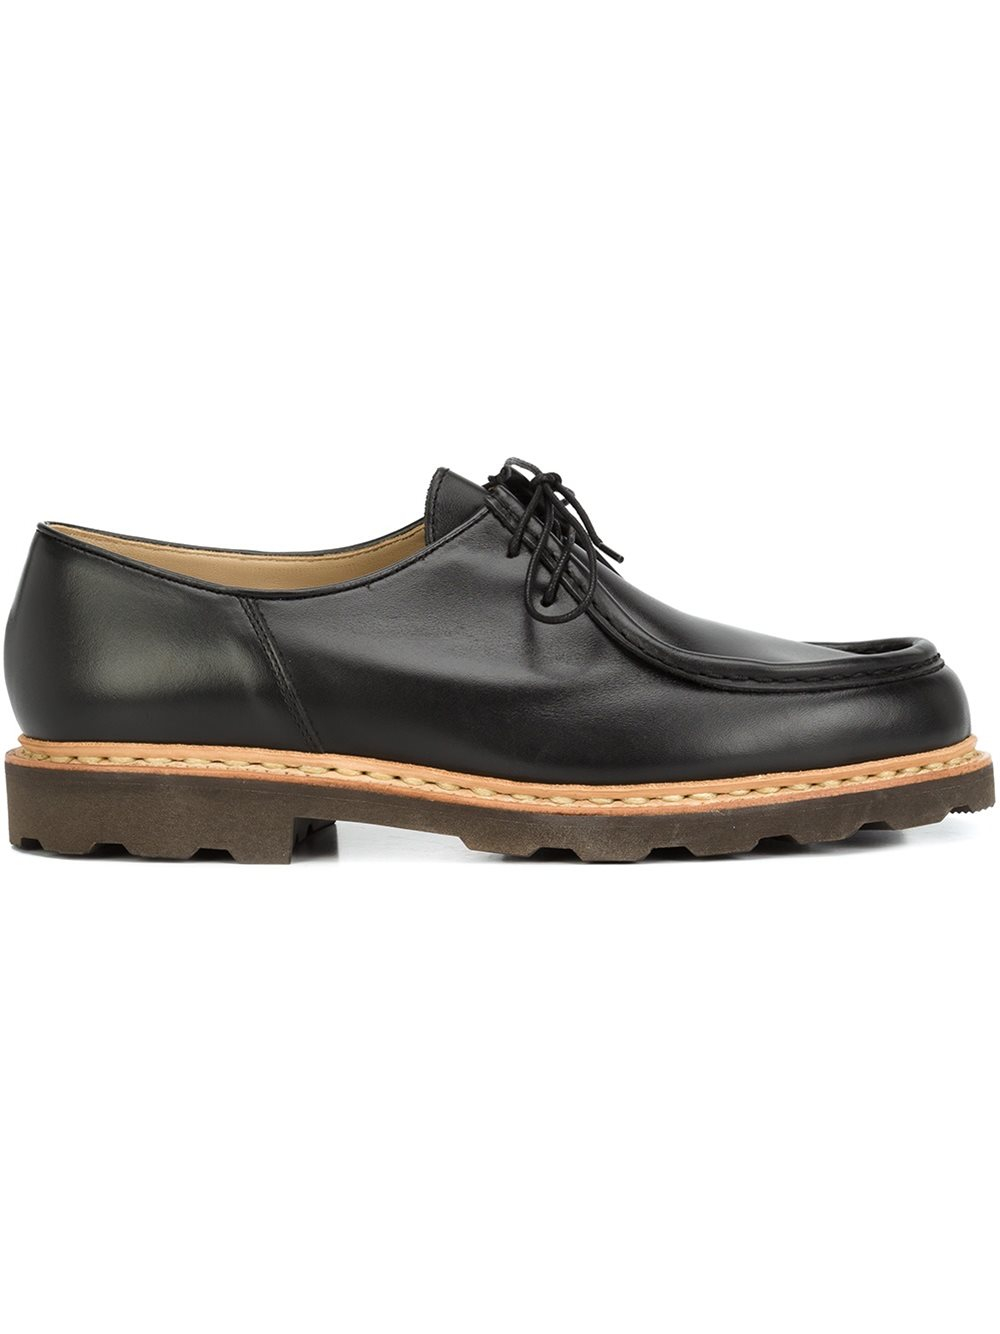 Lyst - Lemaire Chunky Sole Oxford Shoes in Black for Men